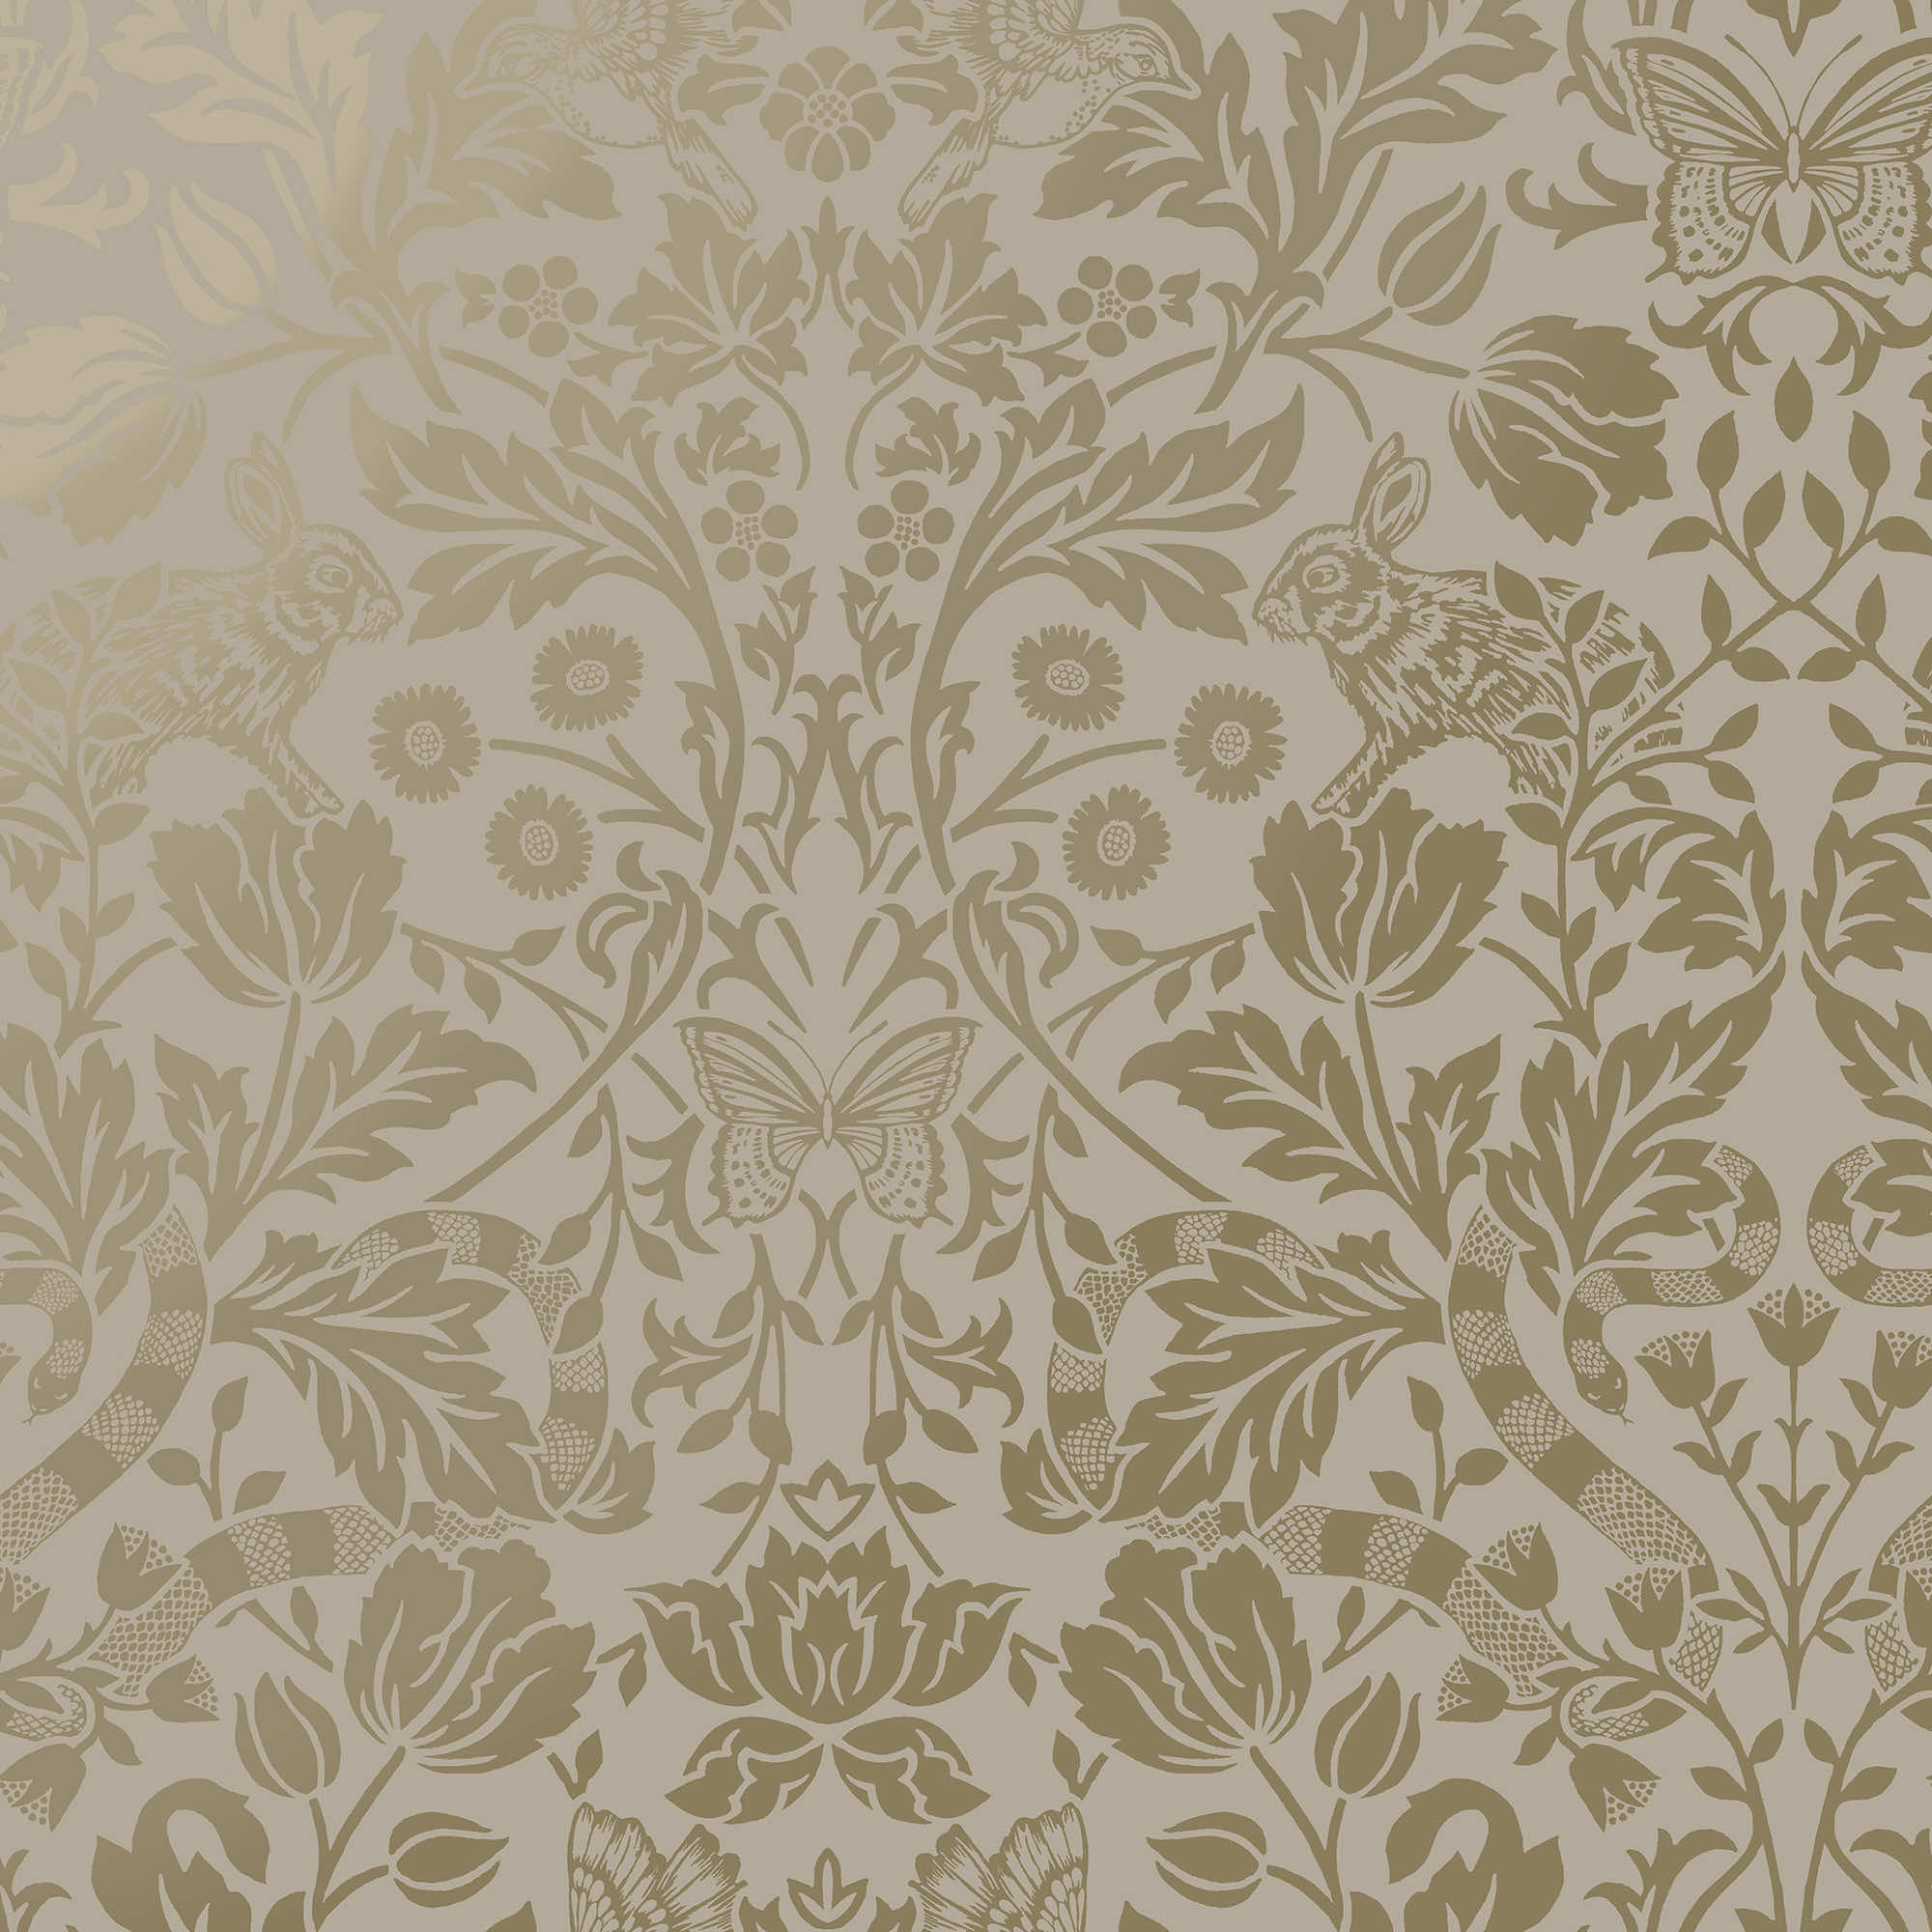 Image of Holden Decor Metallic Mirrored Floral Neutral Wallpaper - 10.05m x 53cm